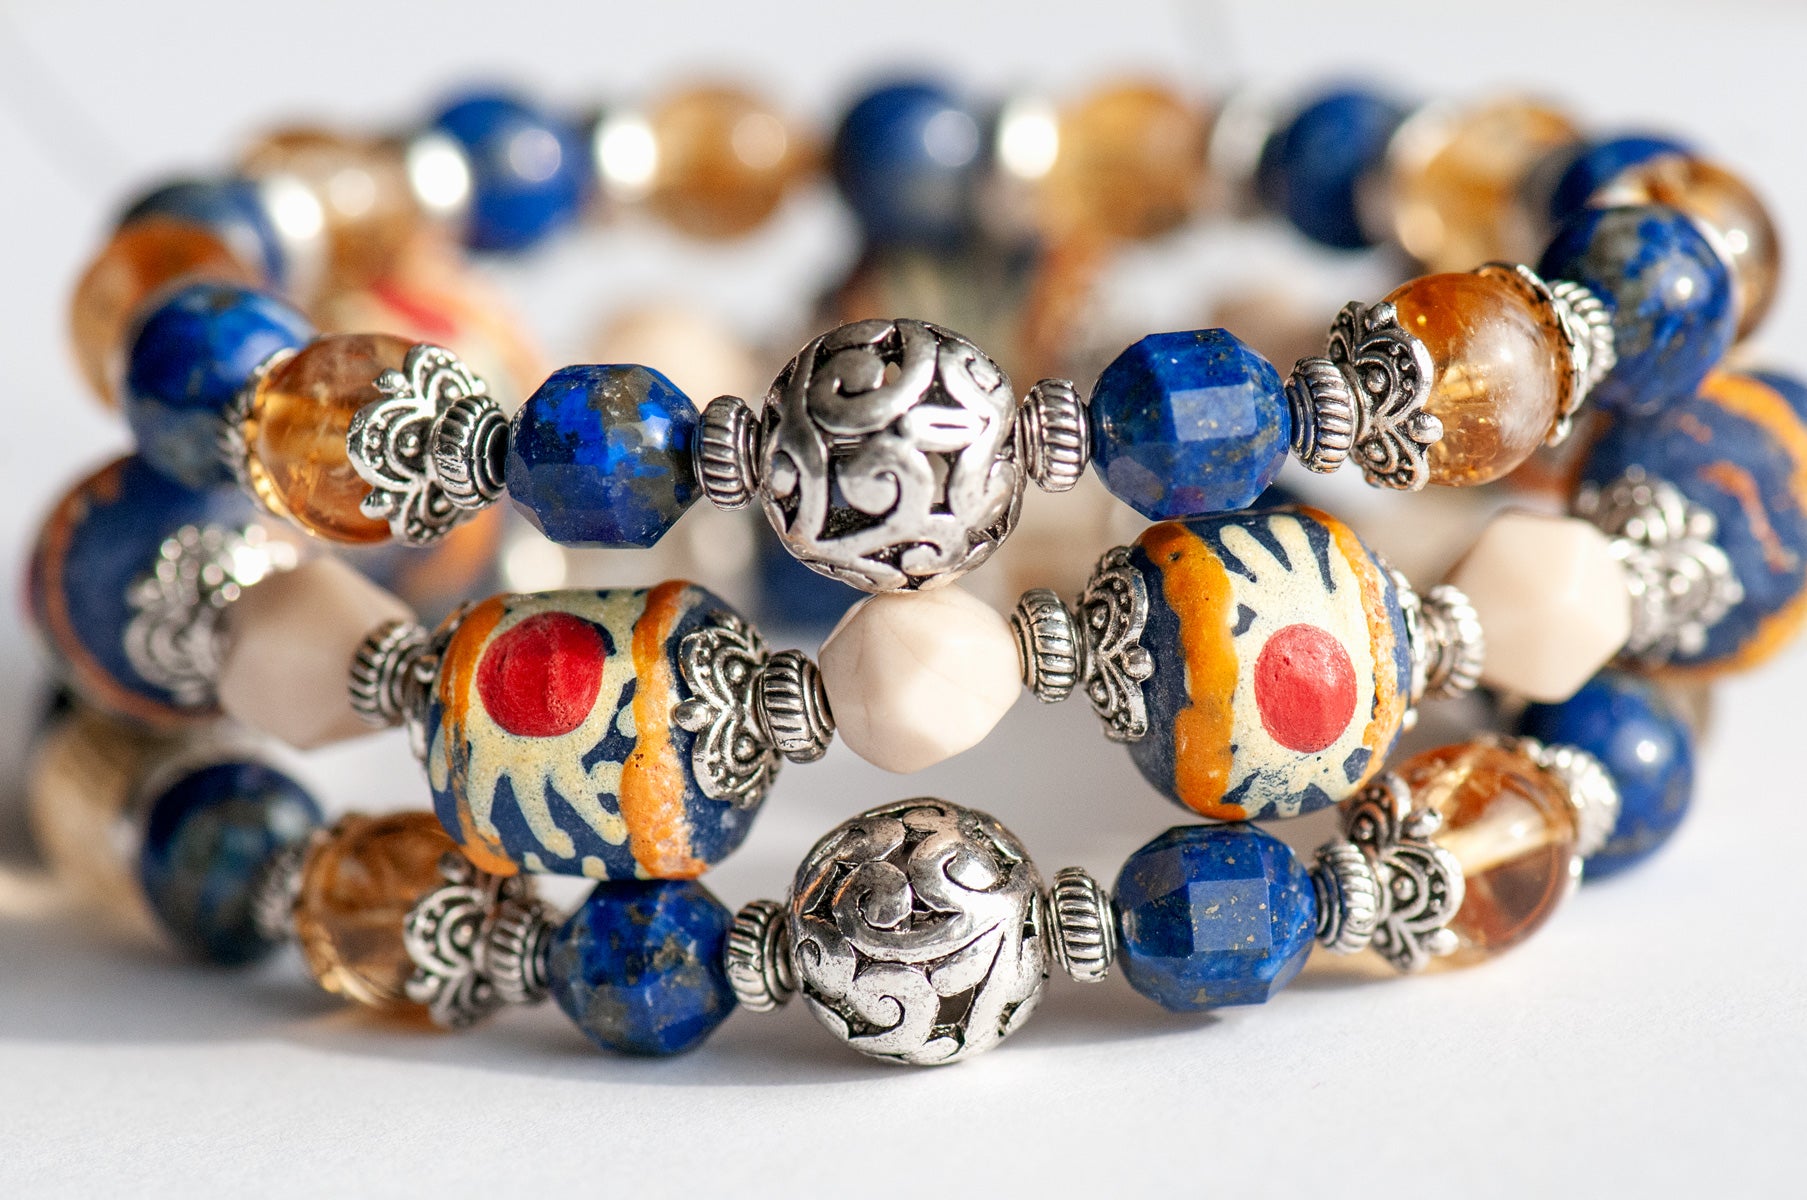 Handmade bracelet set with Citrine, Lapis, and hand-painted beads